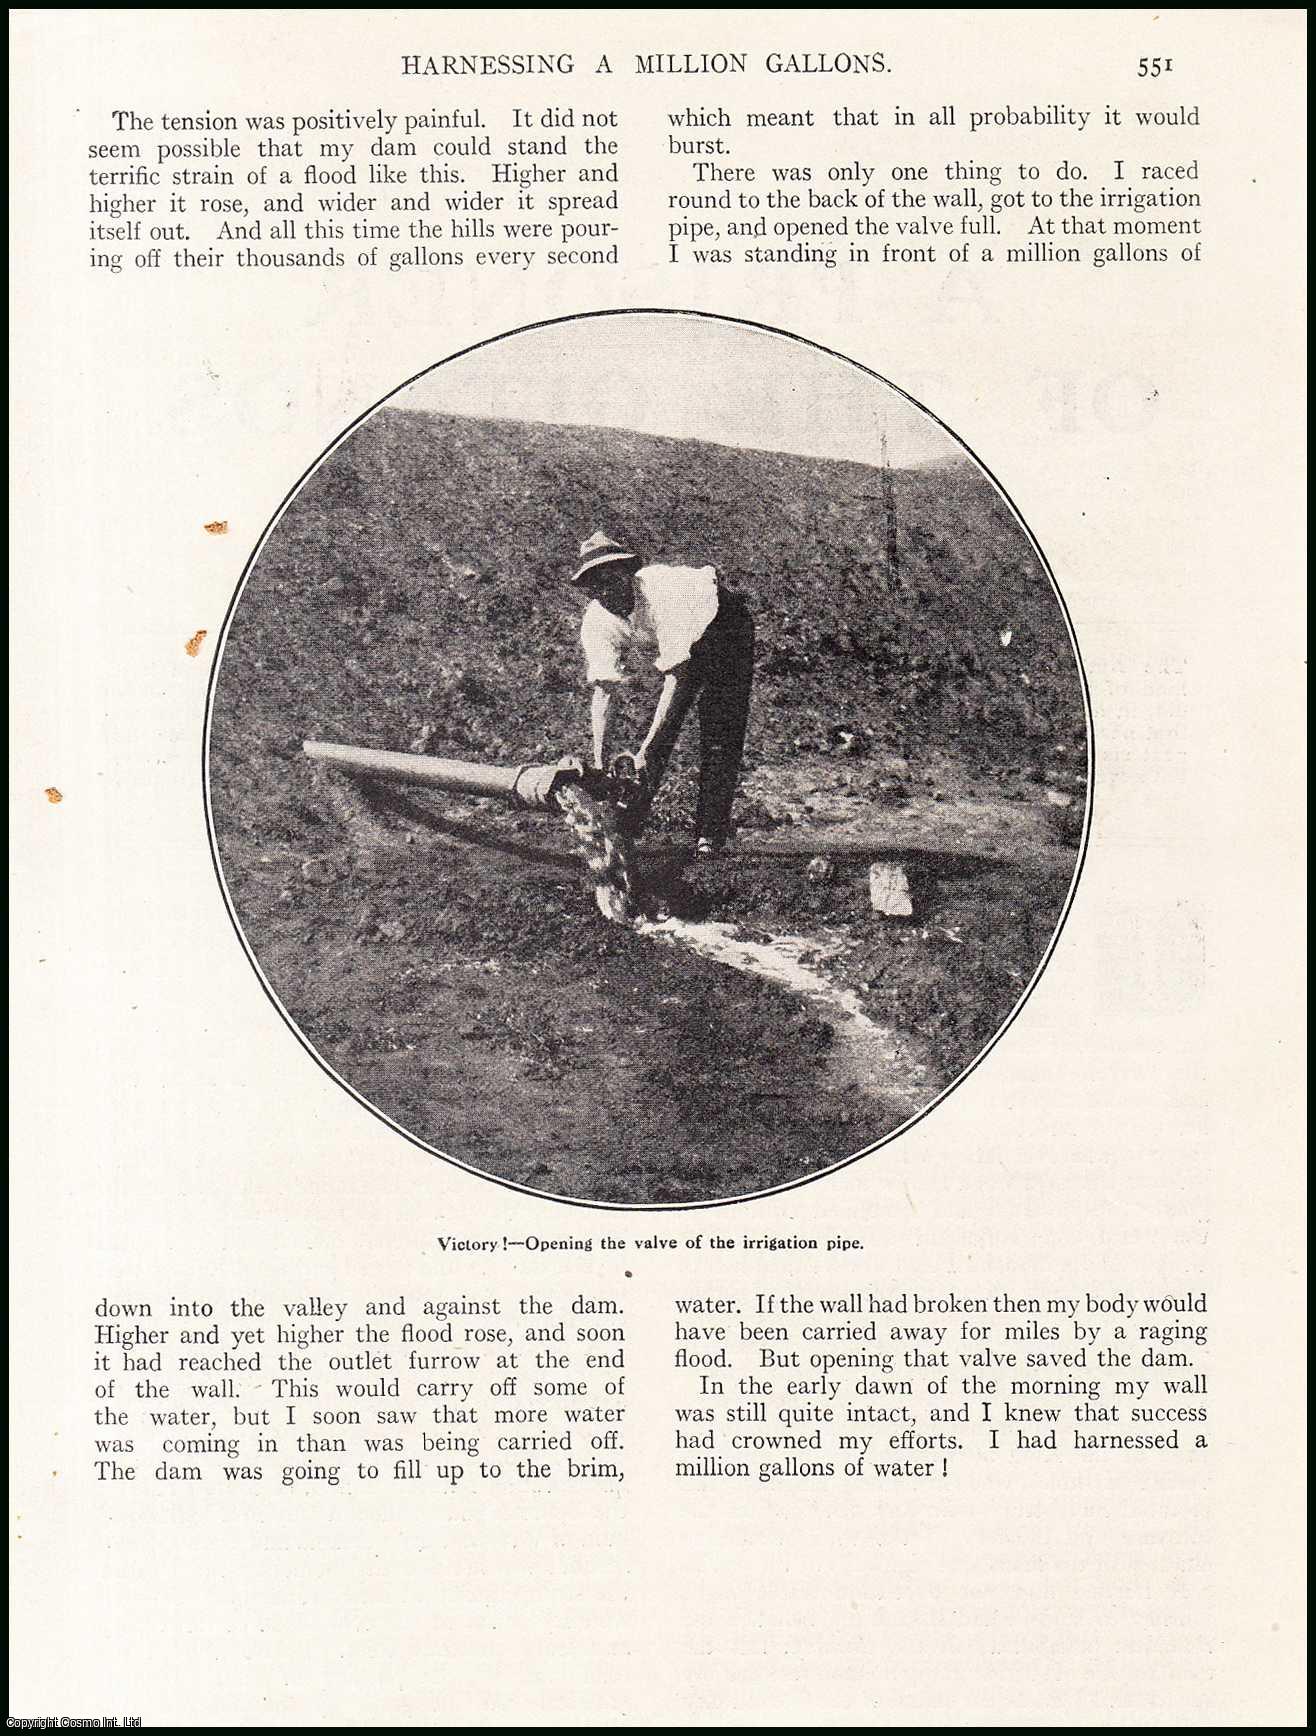 Leonard Flemming - Harnessing a Million Gallons : a South African farmer set to work with two natives & a few oxon, to construct a dam capable of holding a million gallons of rain-water. An uncommon original article from the Wide World Magazine, 1914.